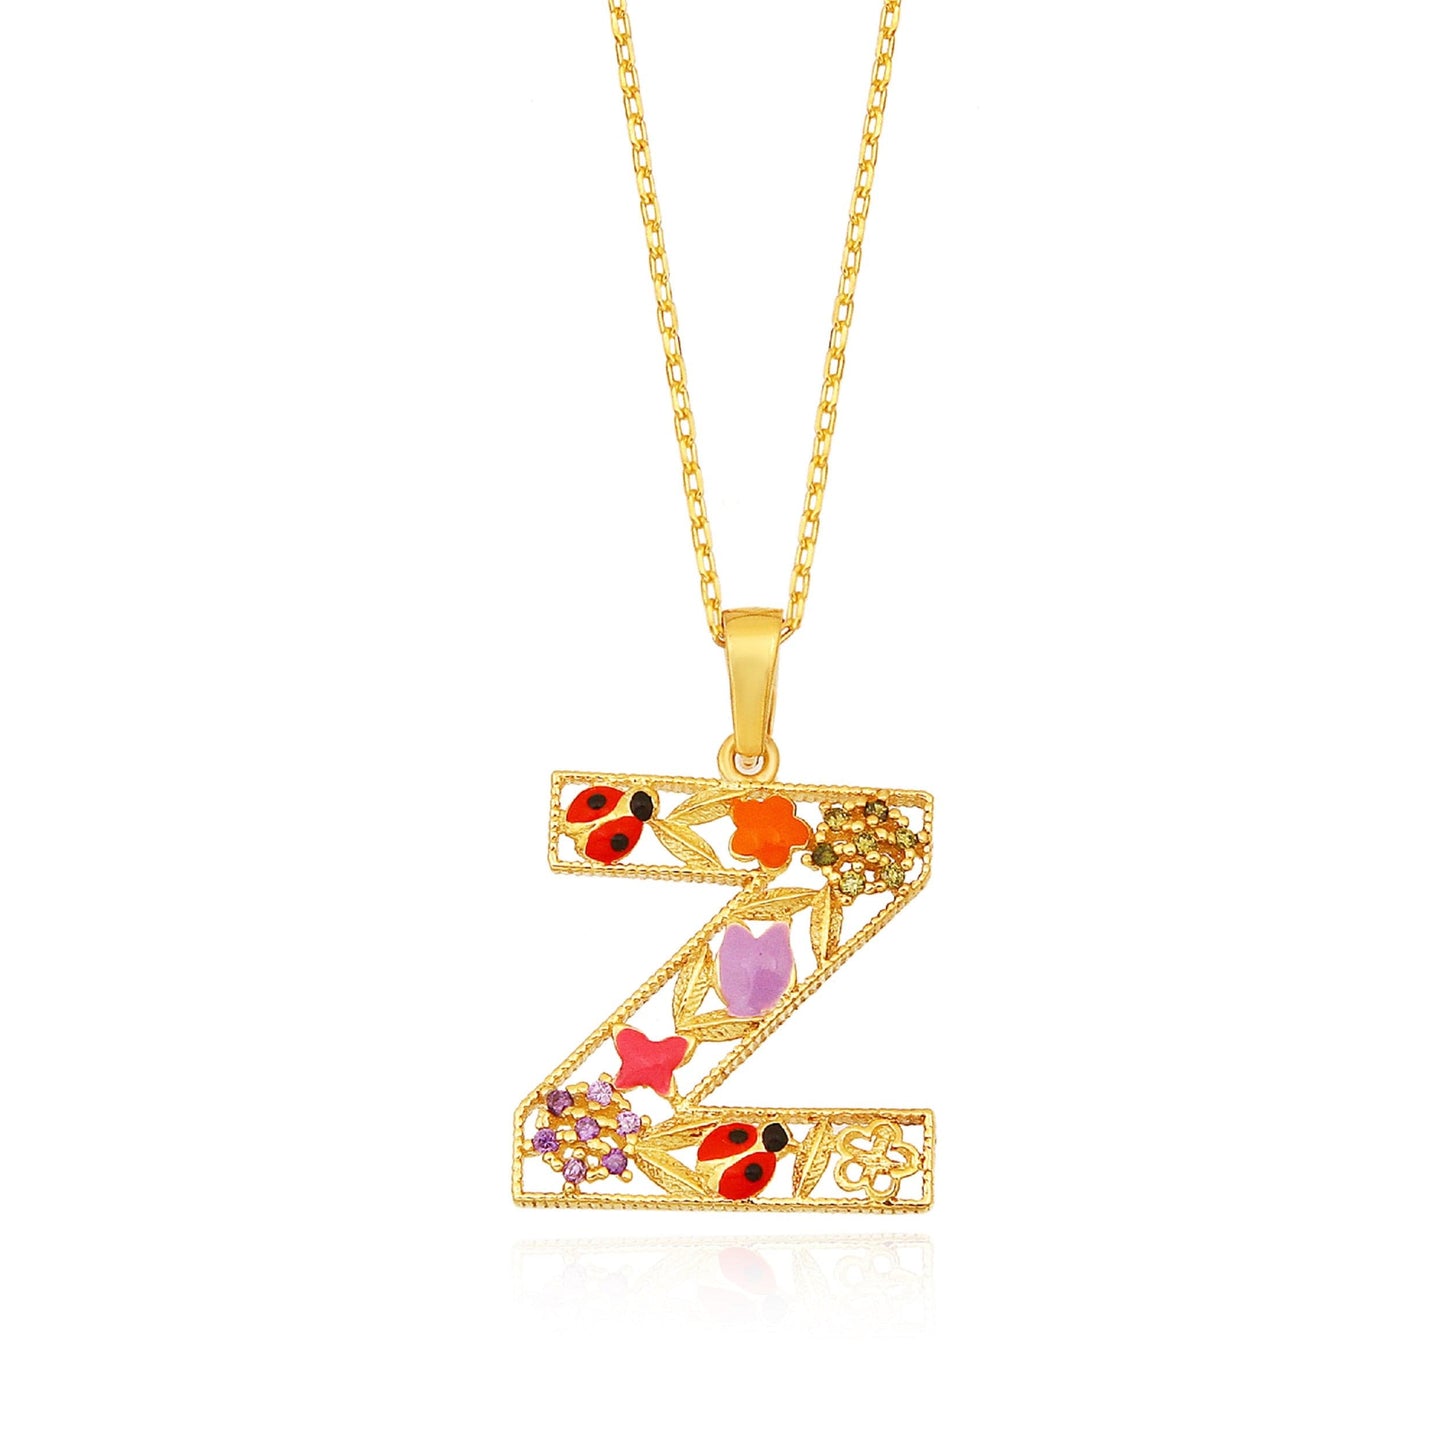 Z letter necklace with flowers